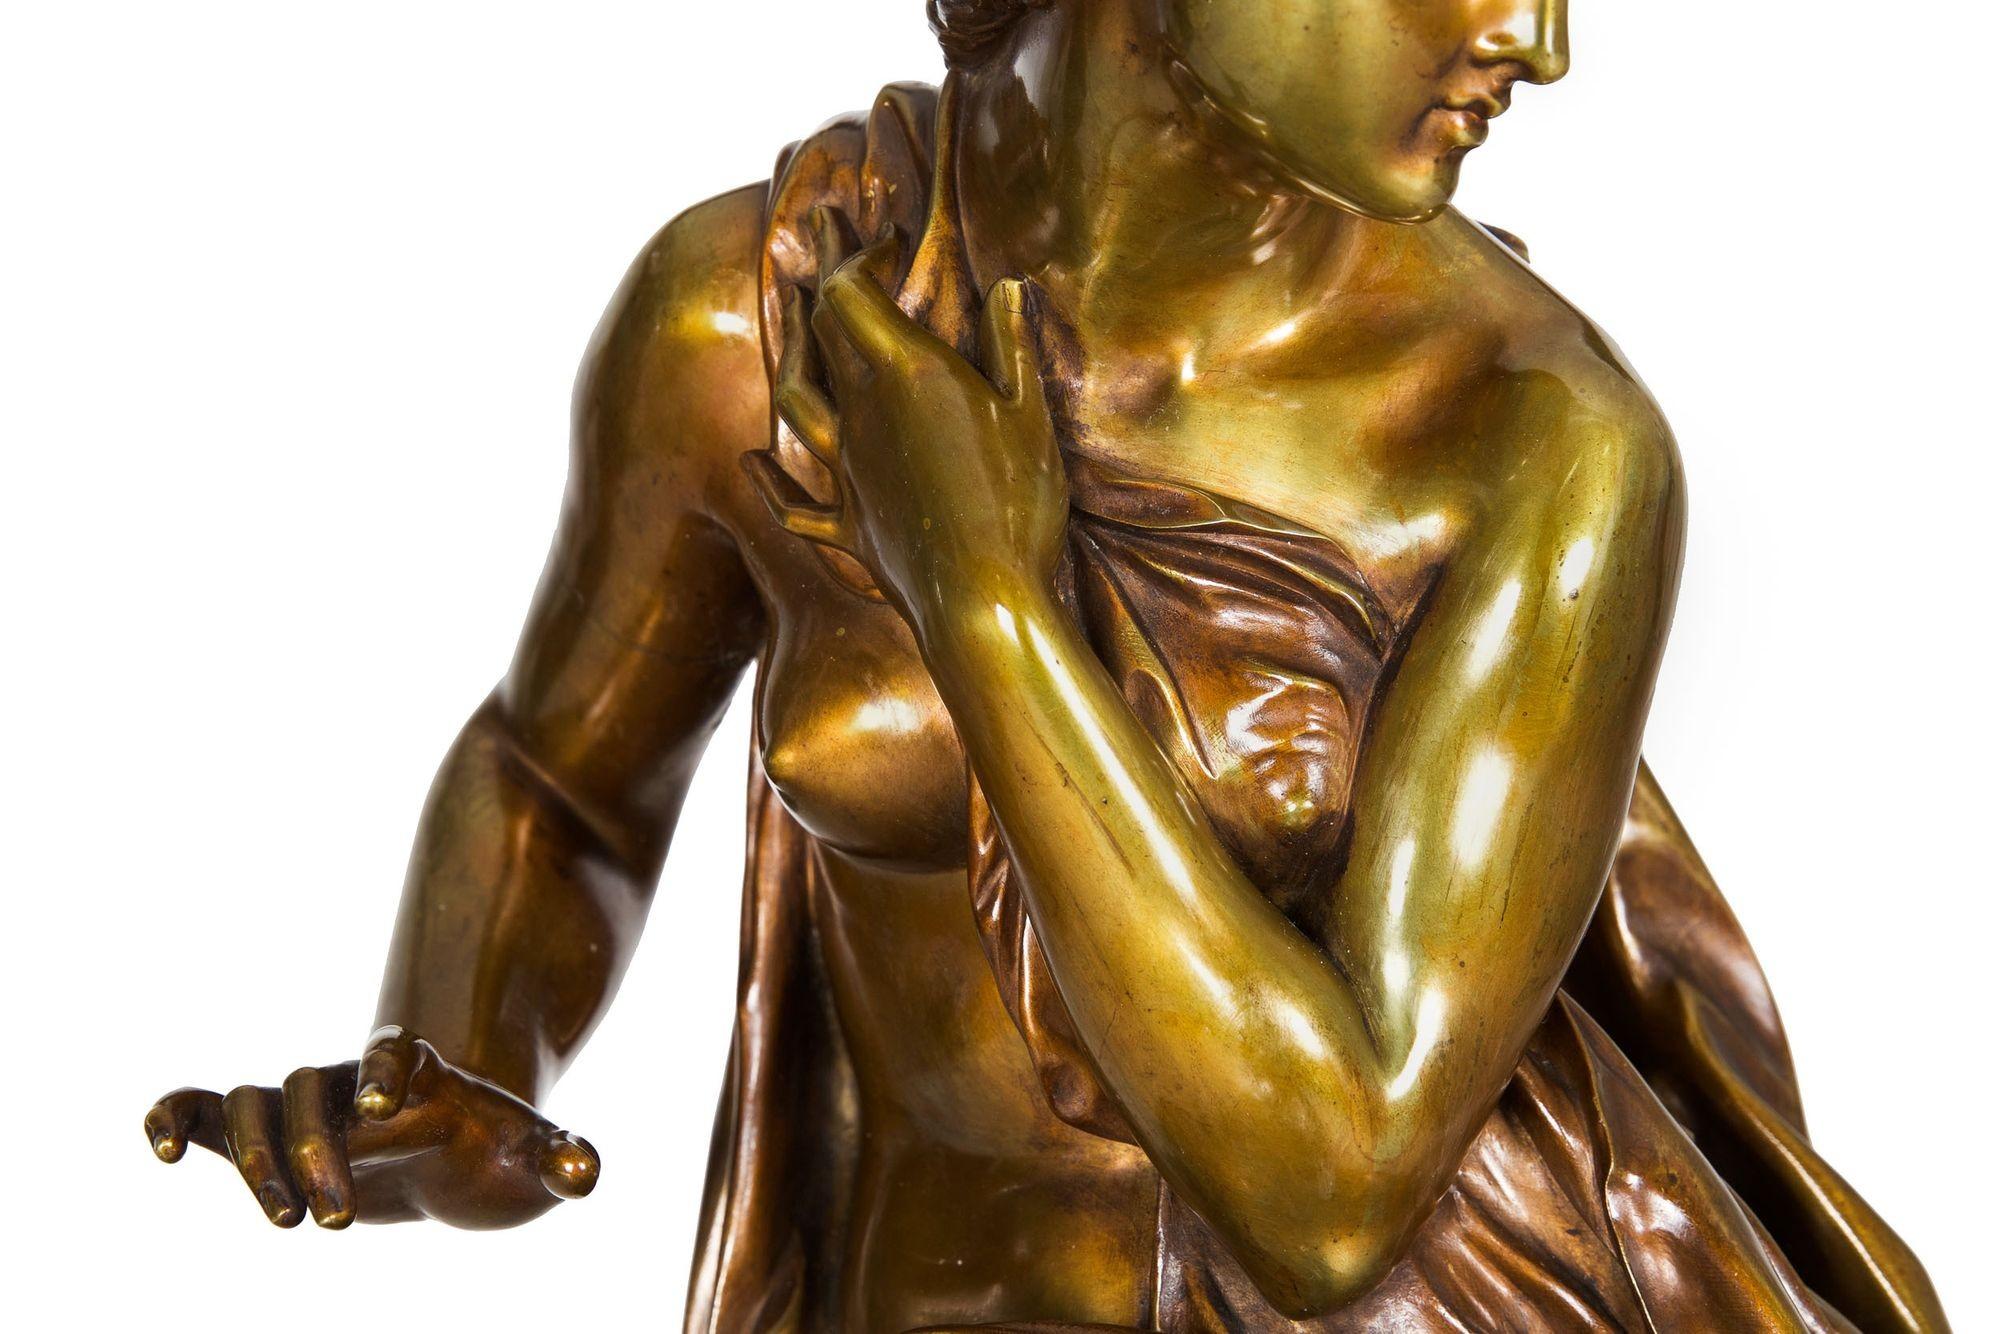 French Antique Bronze Sculpture “Seated Woman” by Etienne-Henri Dumaige, c.1880 For Sale 1